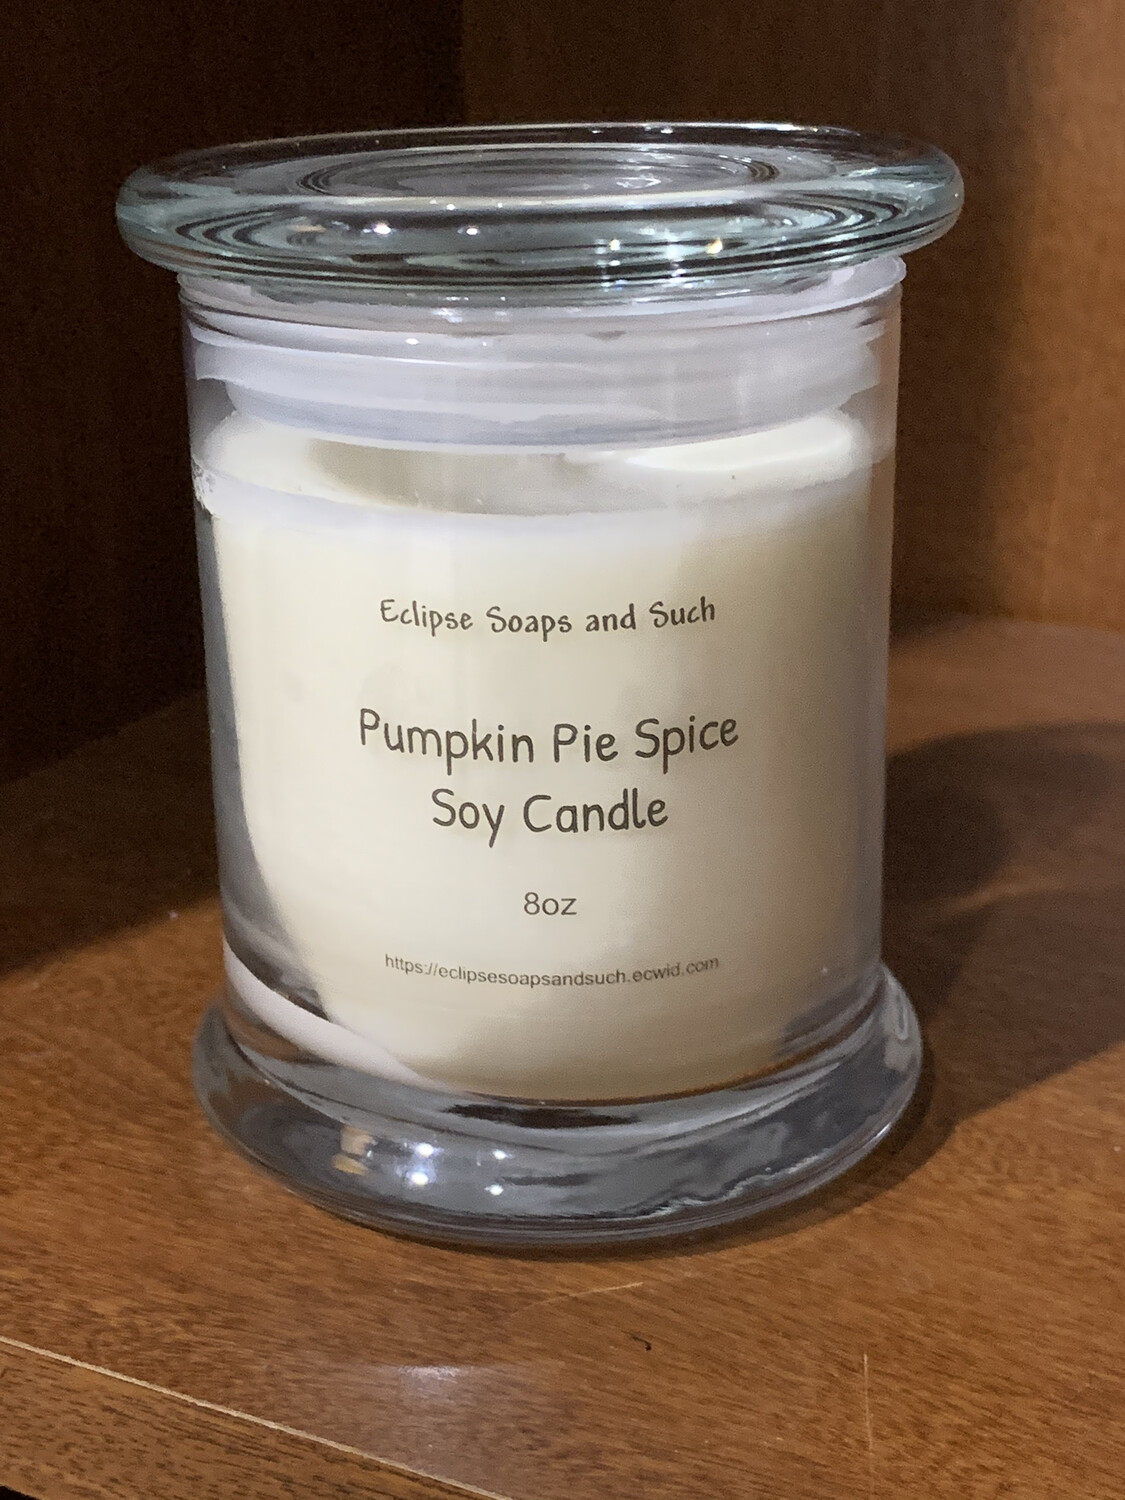 Pumpkin Pie Spice Scented Soy Candle 8oz